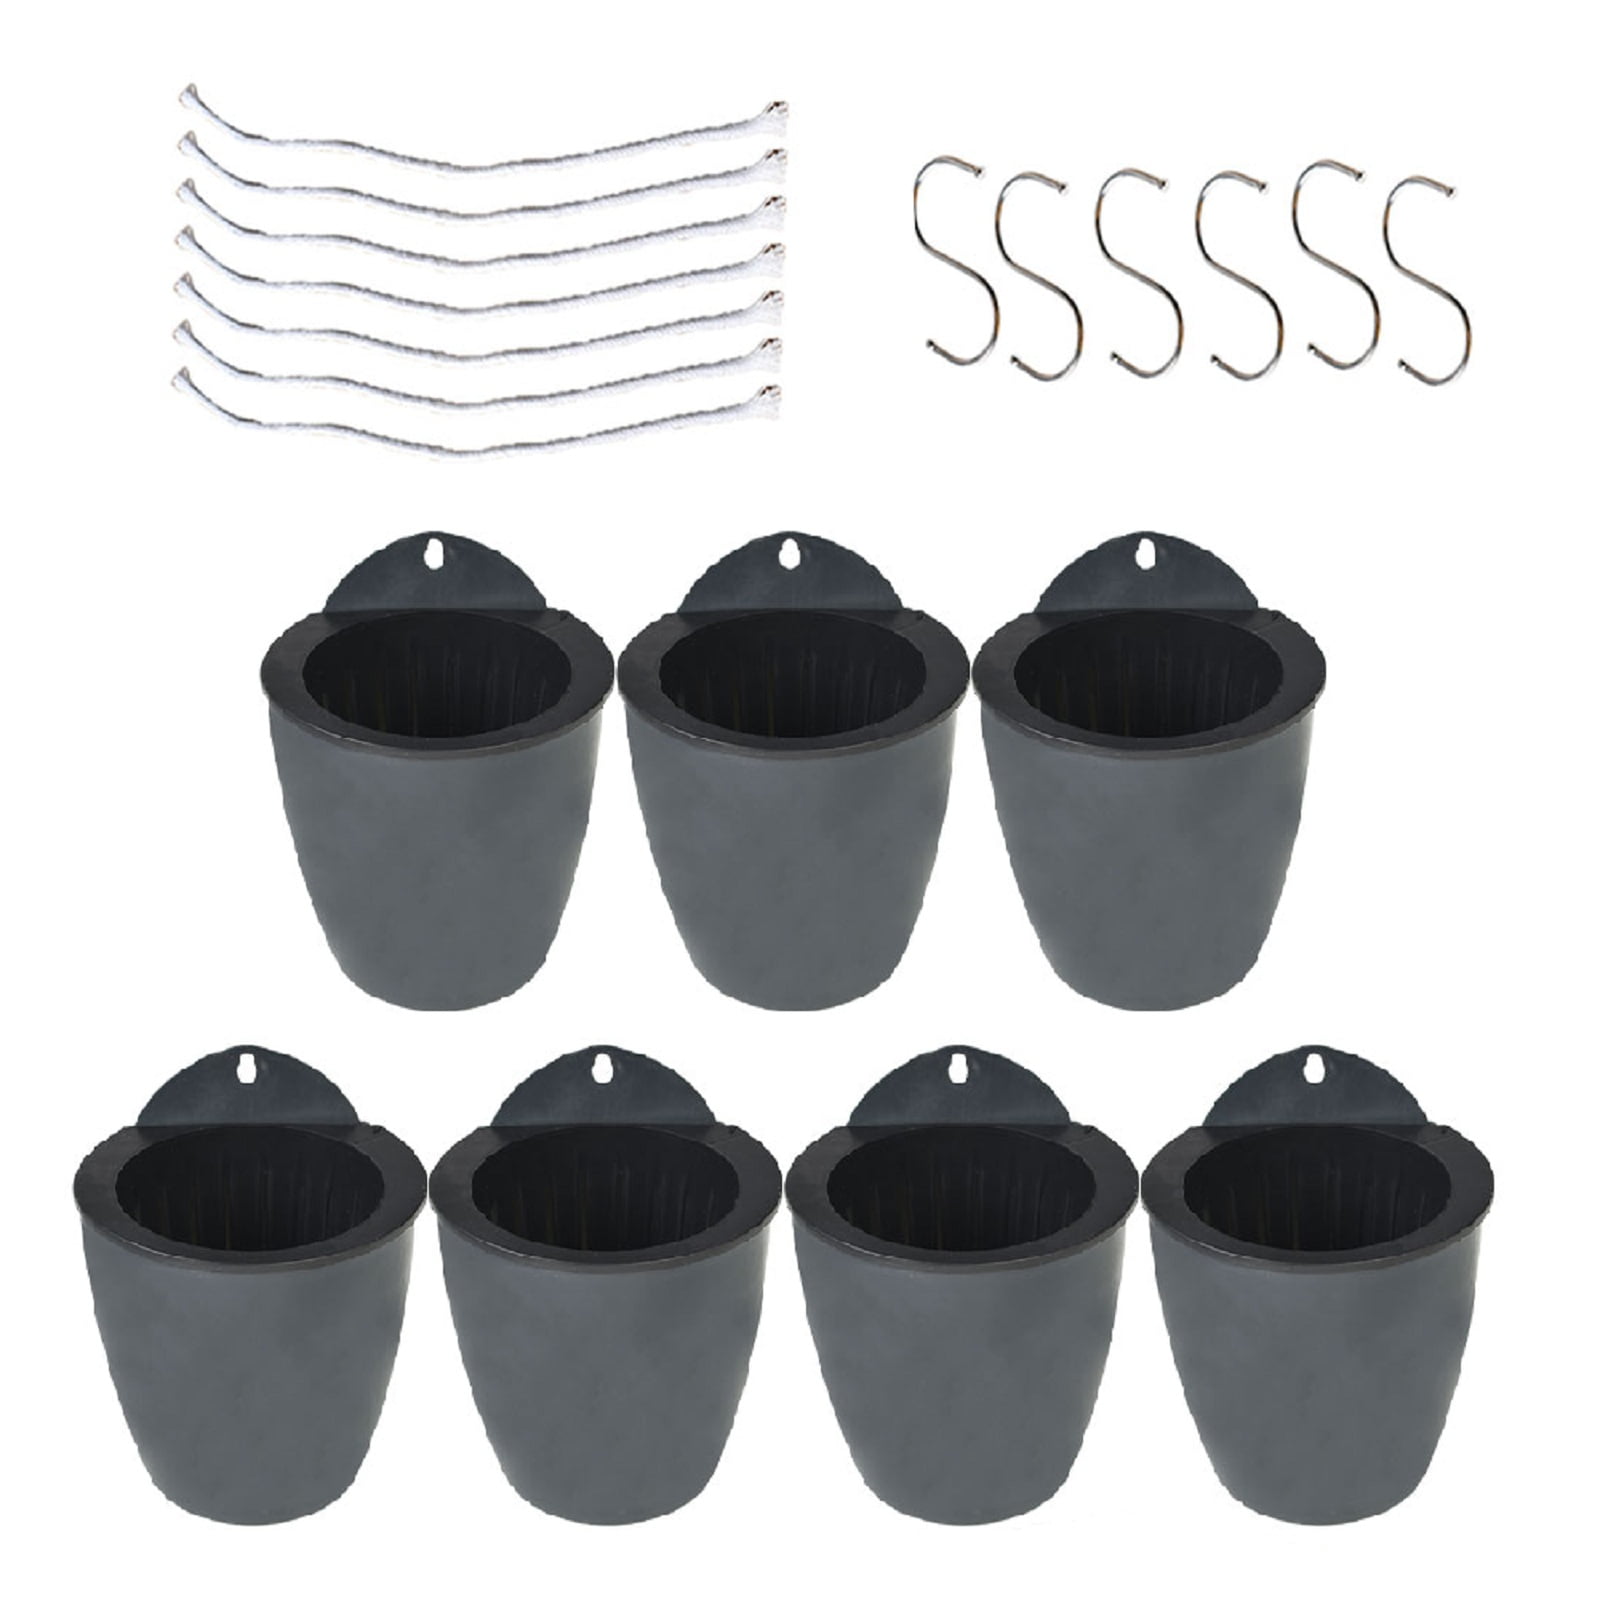 NEW 7Pcs Self-watering Plant Flower Pot Wall Hanging Plastic Planters with Hook 